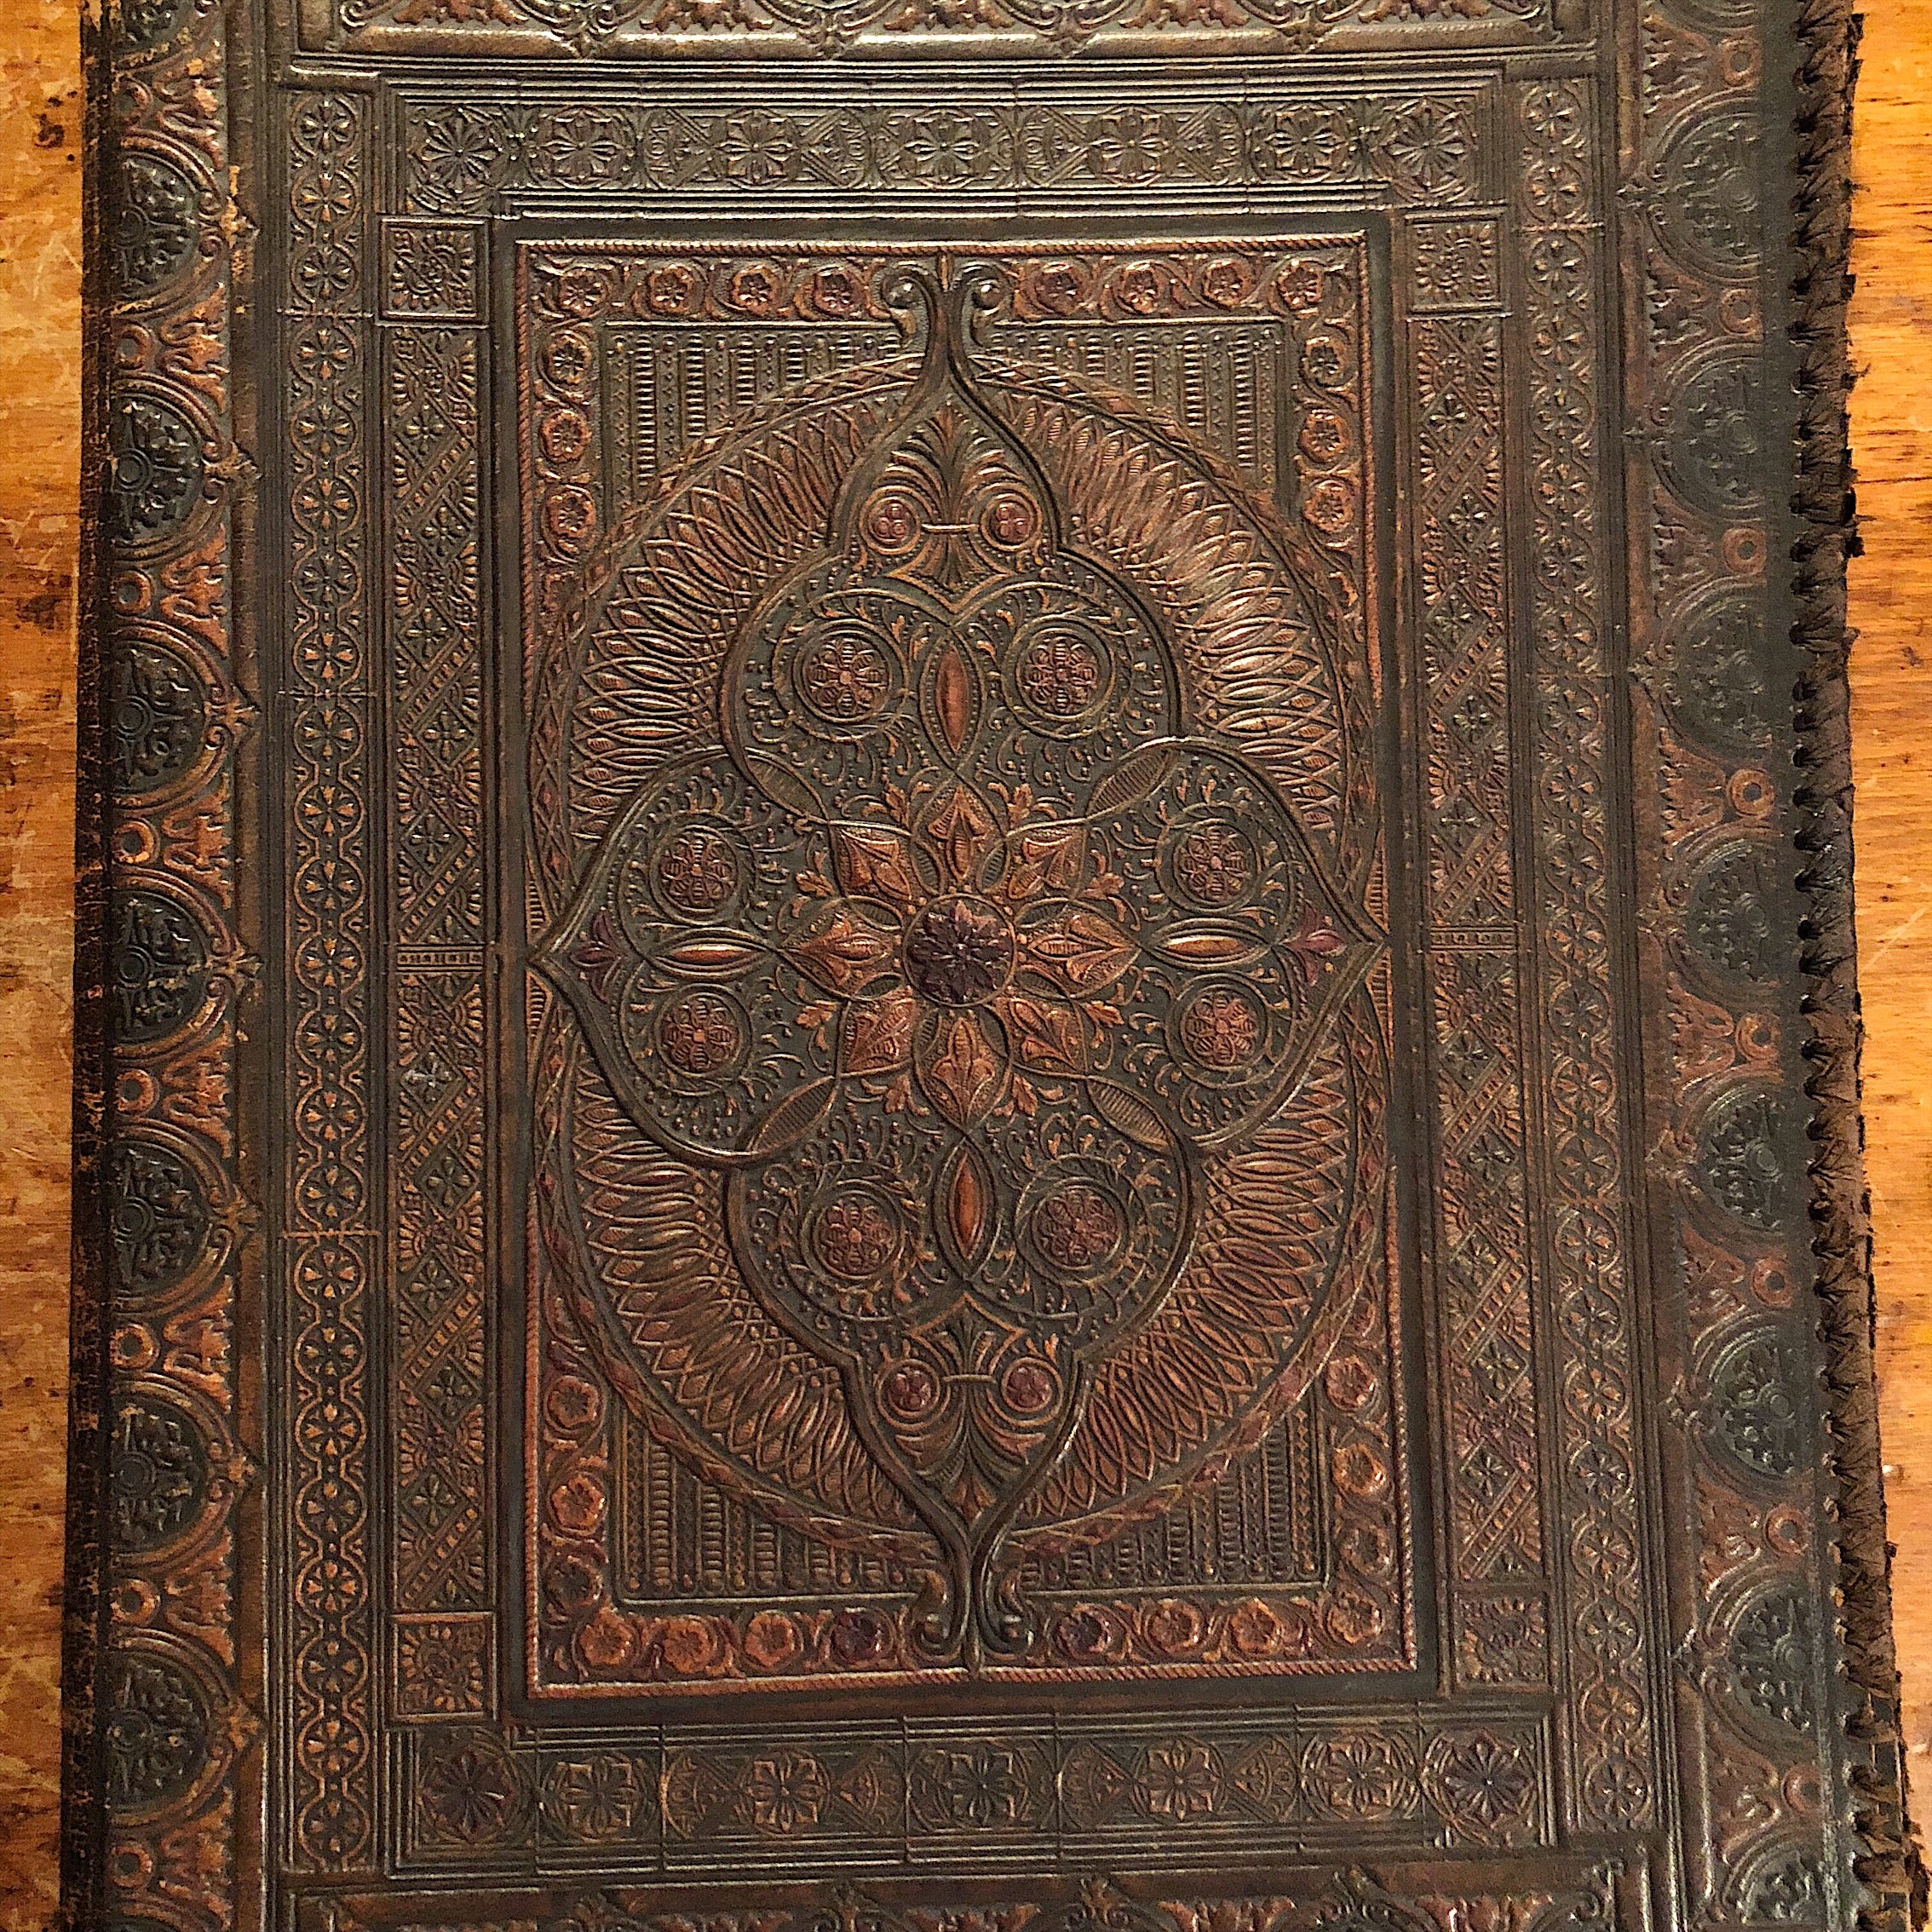 Antique Leather Portfolio Cover with Tooled Ornate Design - Continental School Manuscript Cover - 1800s - Arts and Crafts - 19th Century